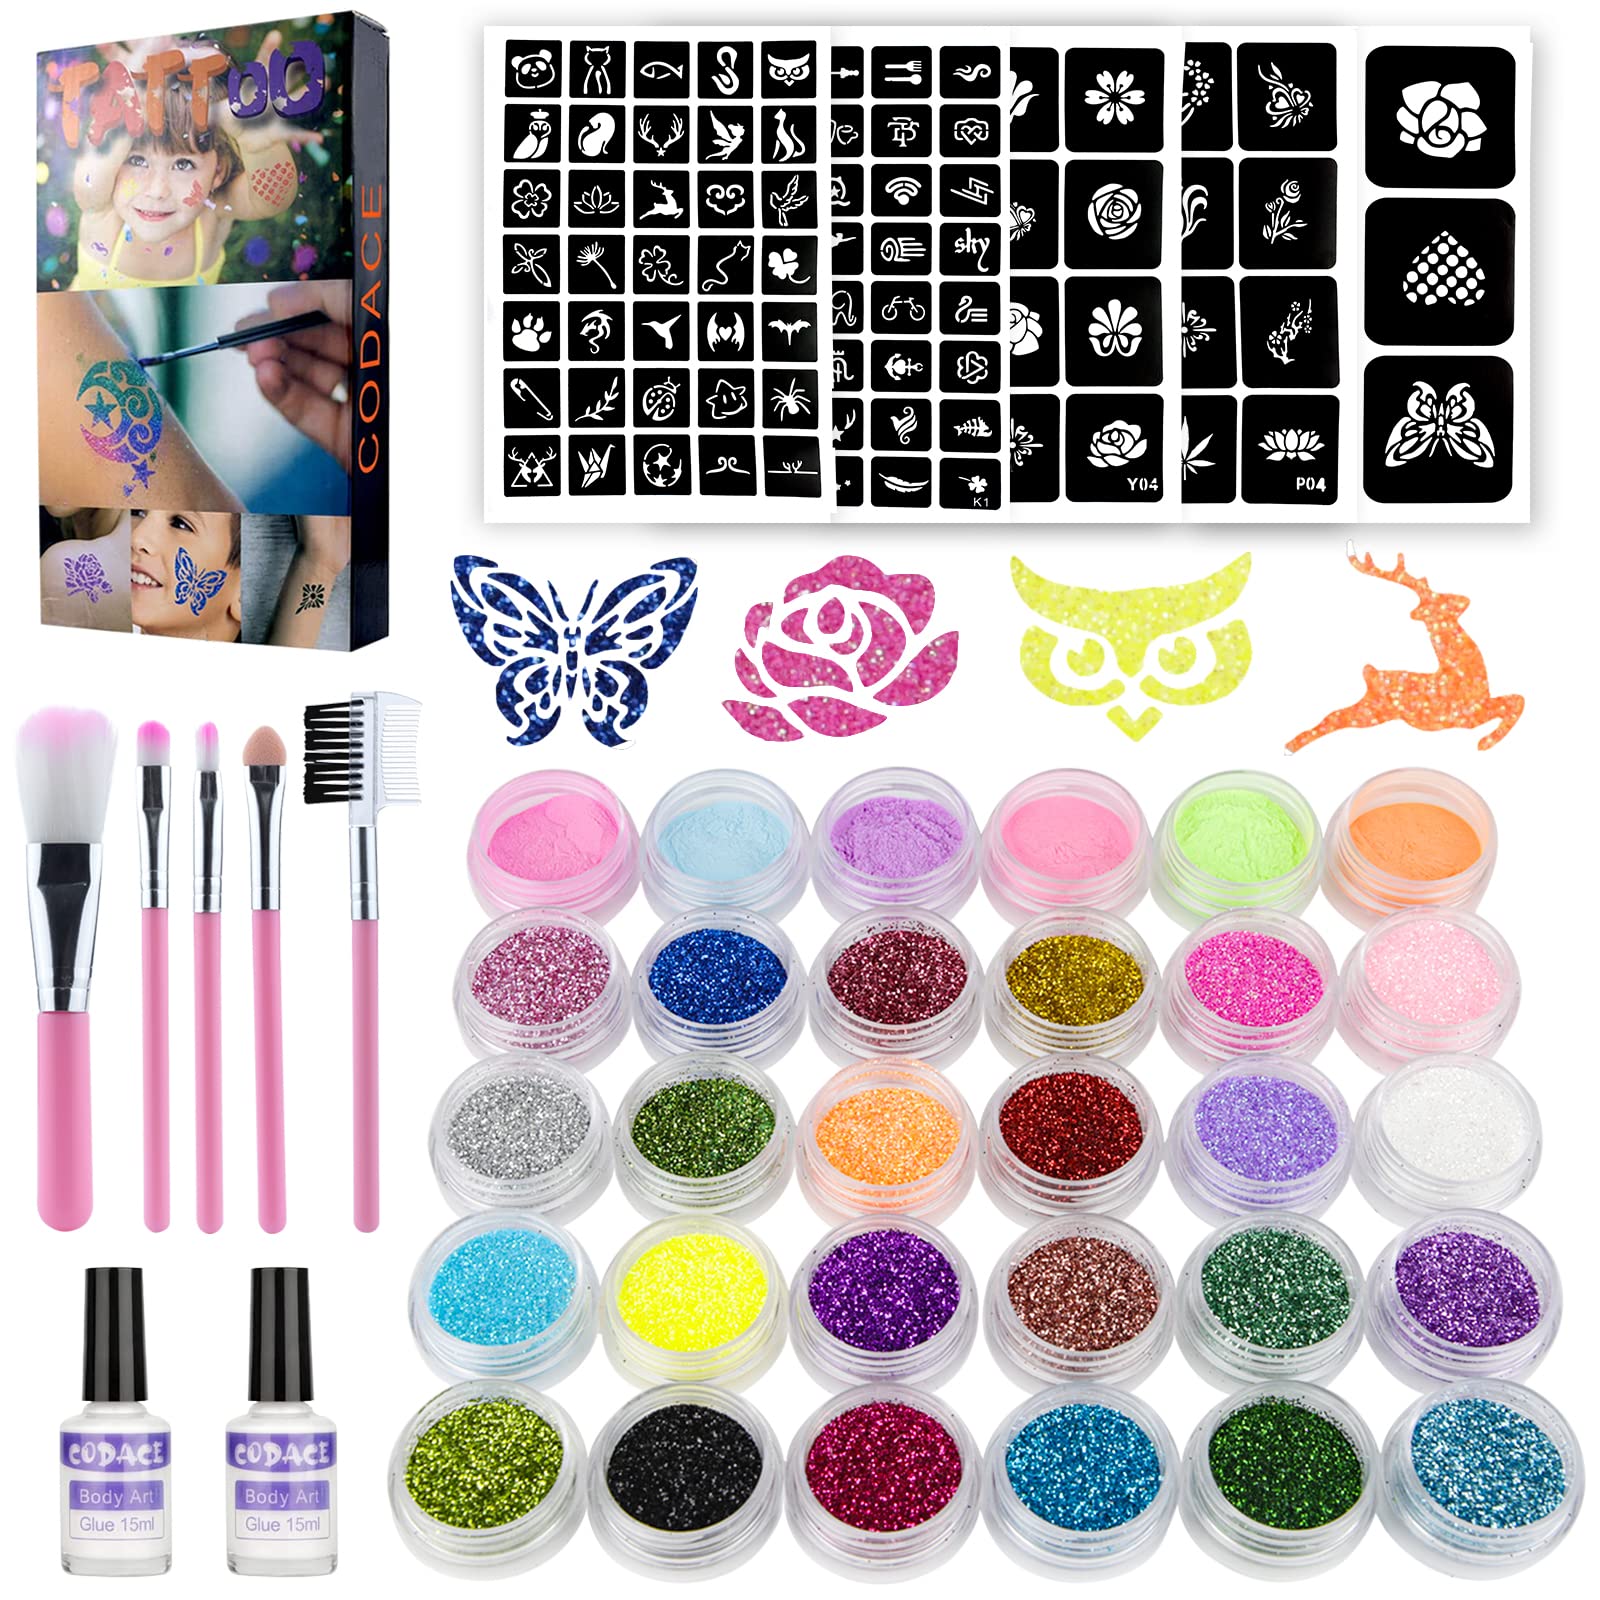 Glitter Tattoo for Kids, Glitter Tattoos 48 Colors, 318pcs Glitter Tattoo  Stencils, 10 Sheets Tattoo Stickers Supply Sparkly Temporary Tattoos2  Glues,5 Brushes Adults & Kids Arts Glitter Make Up Kit - Yahoo Shopping